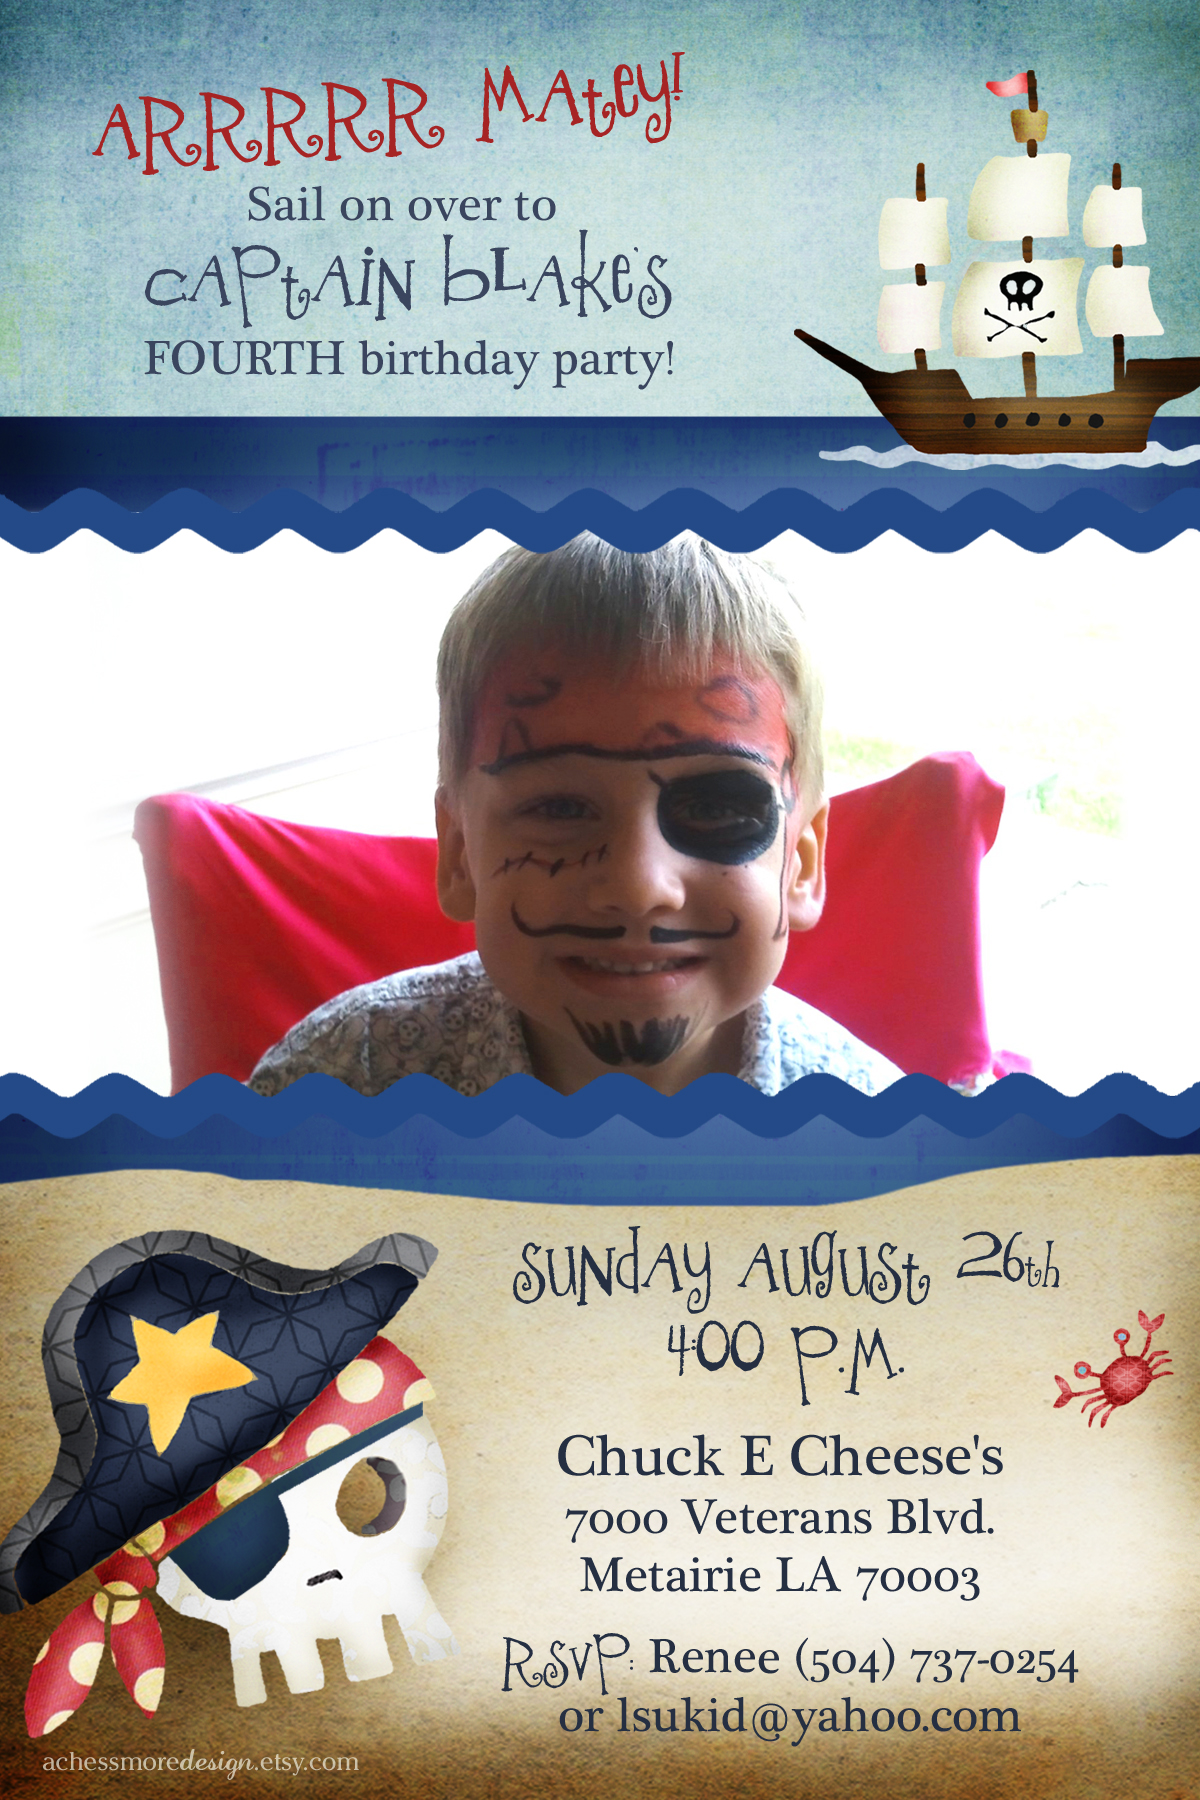 Perfect Pirate Party Ideas!